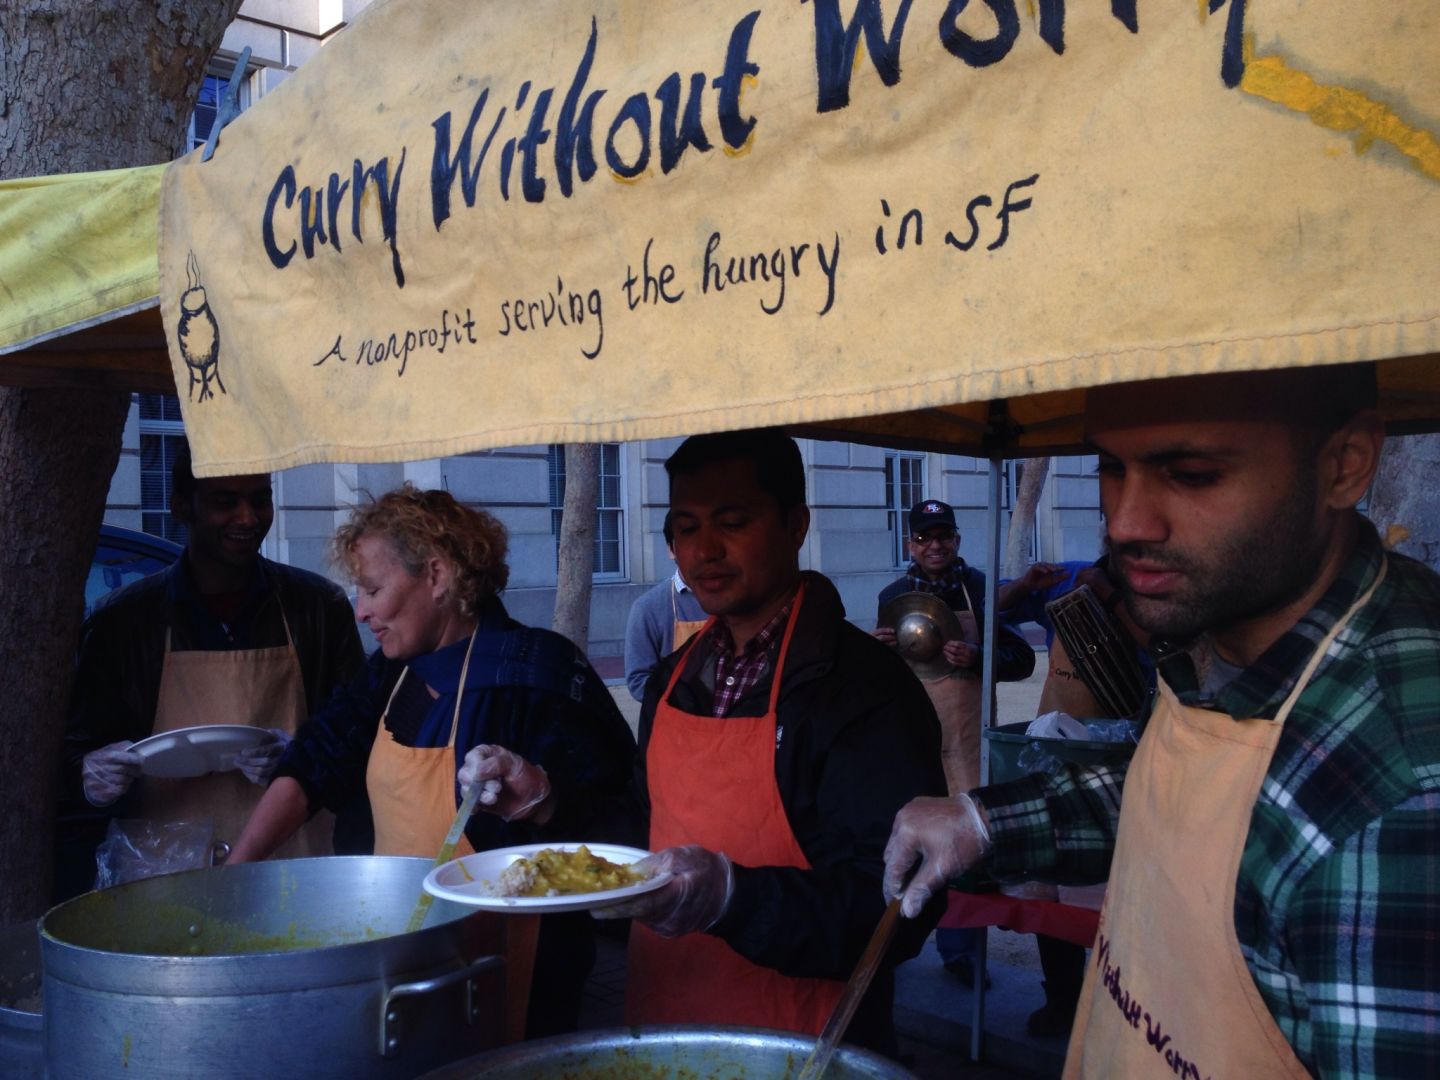 Curry without Worry serves hot meals to the hungry.